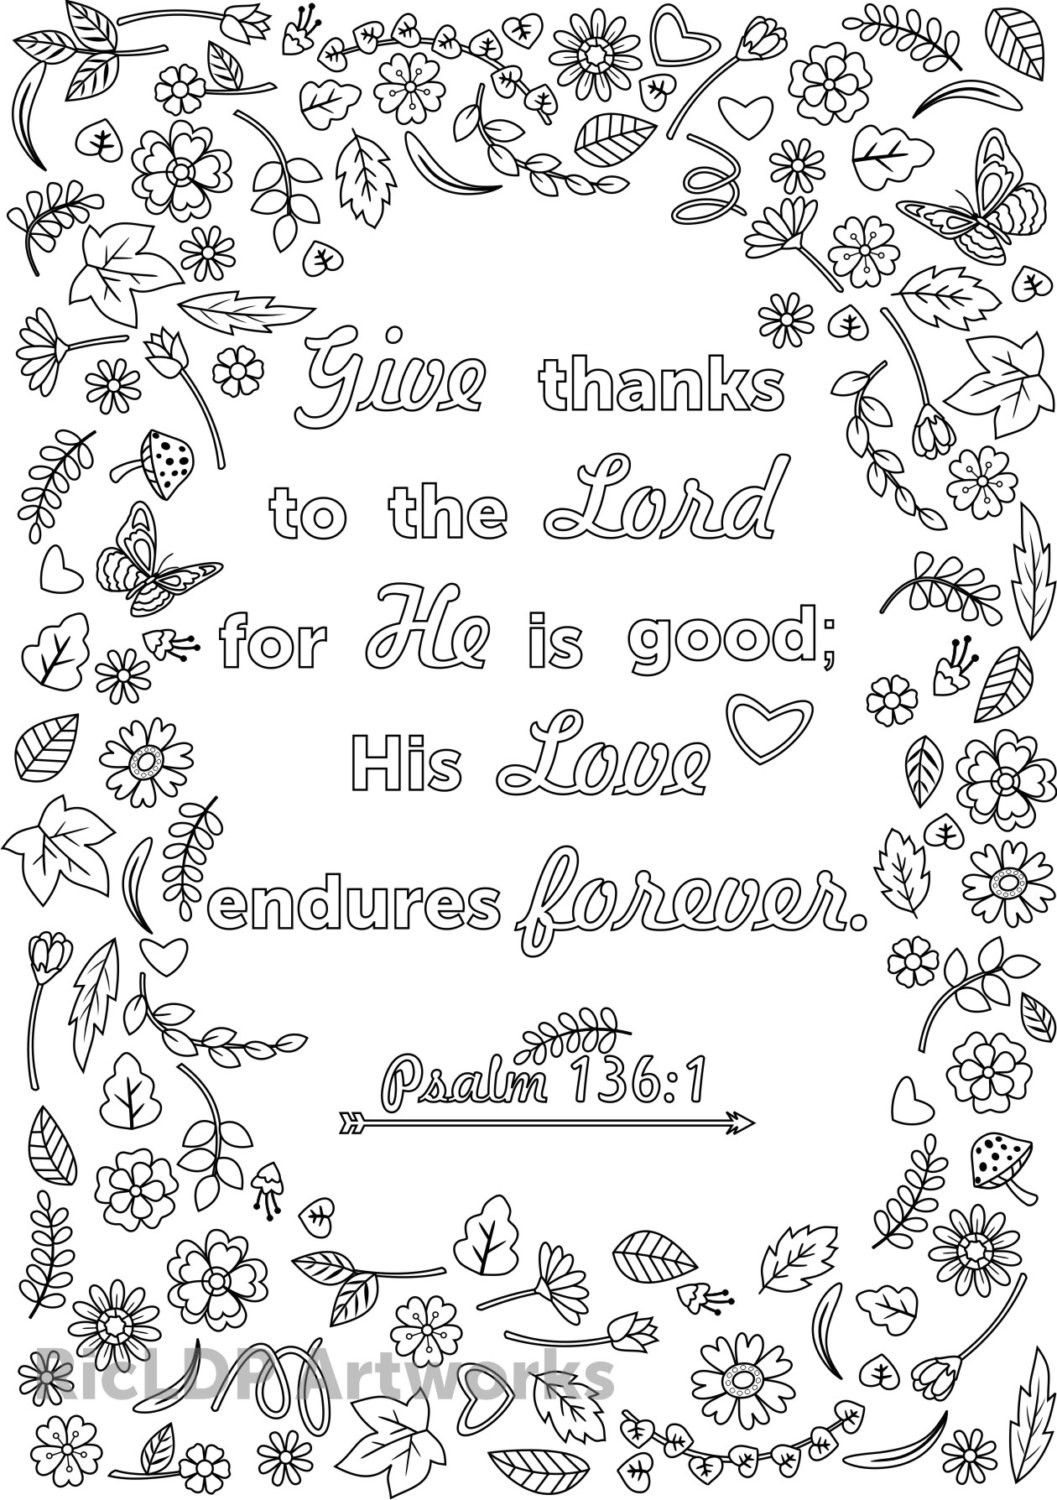 Bible Coloring Pages For Adults Pdf
 Three Bible Verse Coloring Pages for Adults Printable